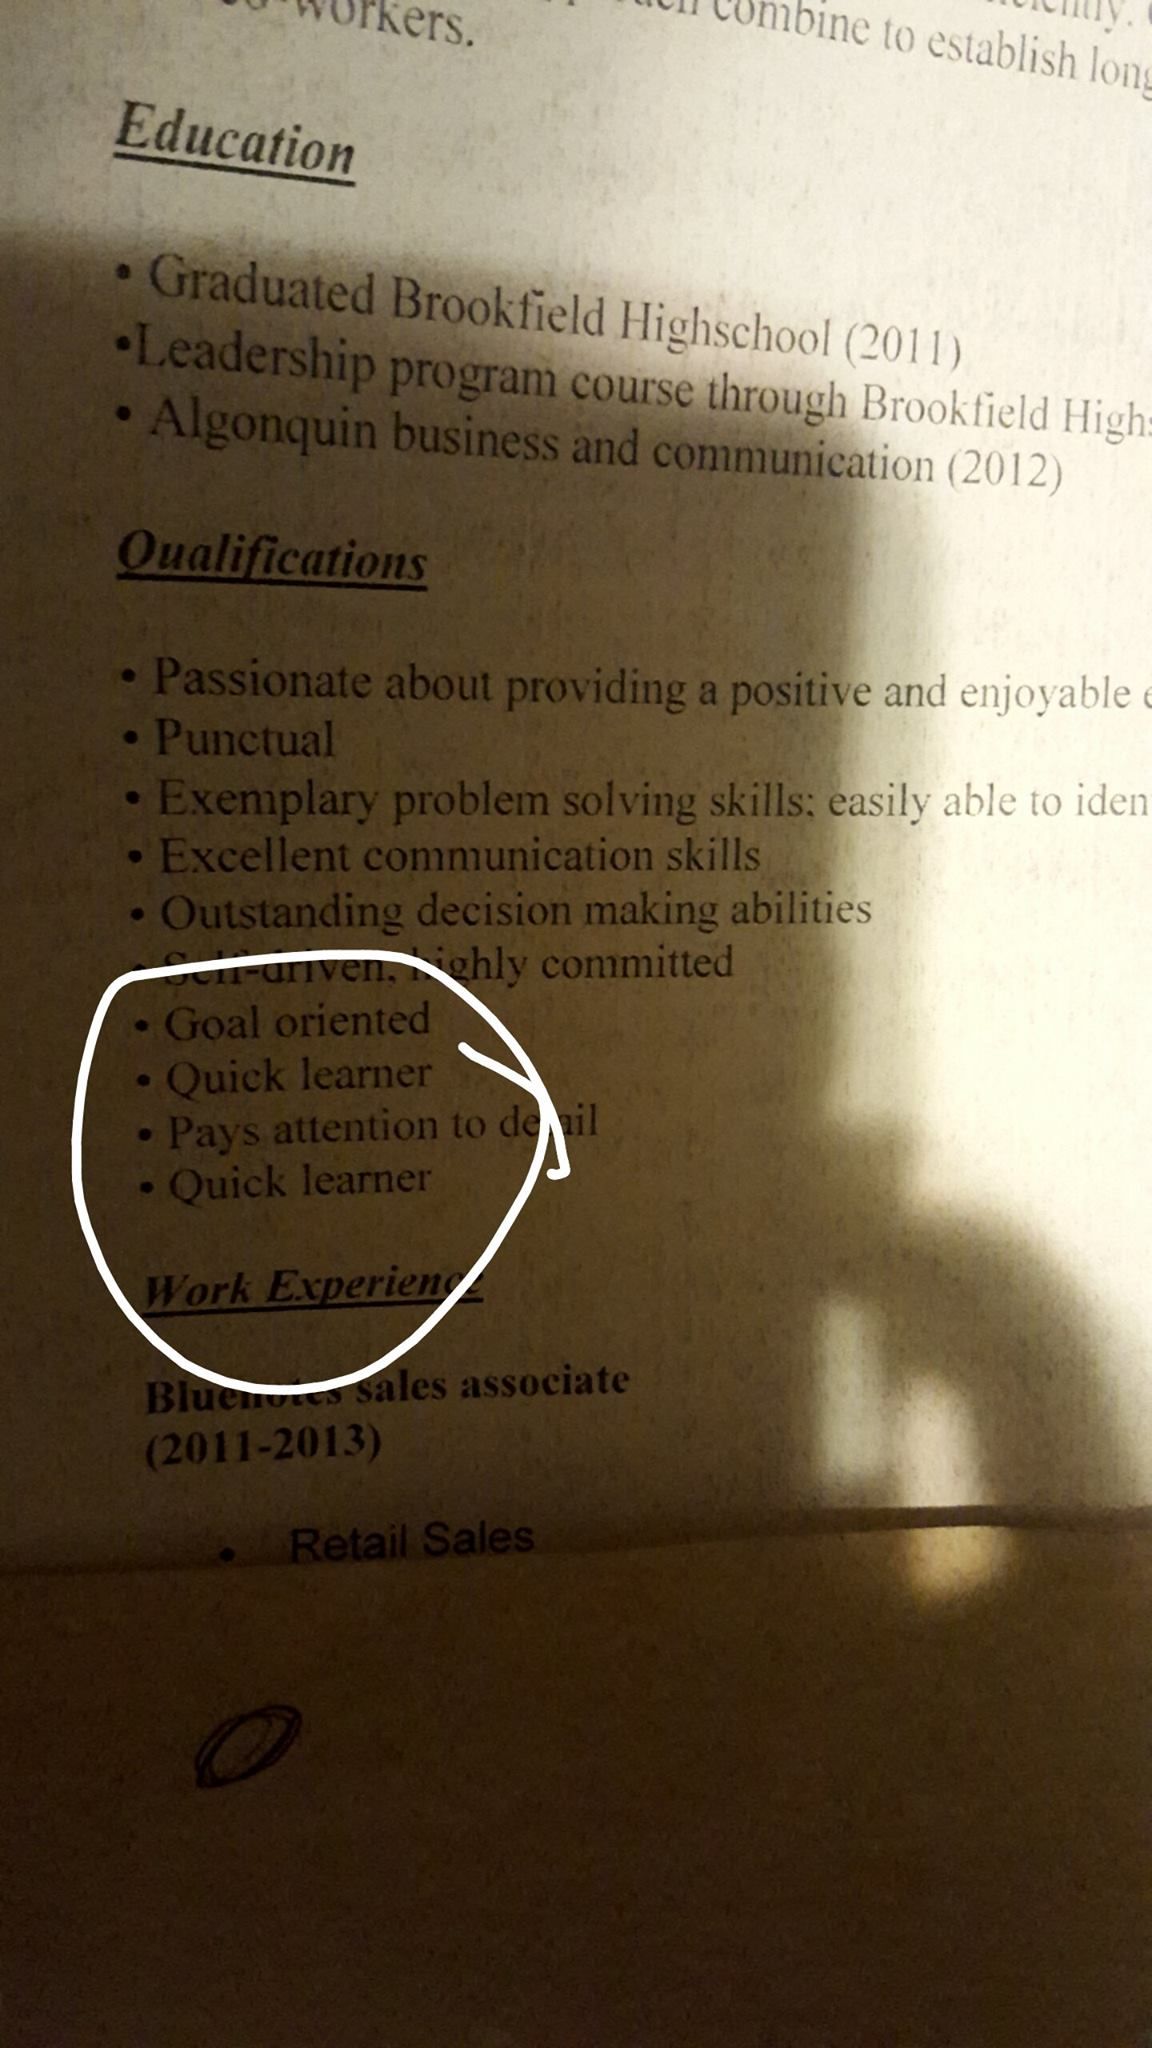 Roommate didn't pay rent for April and left our house. Found this resume in a box of old crap he left.